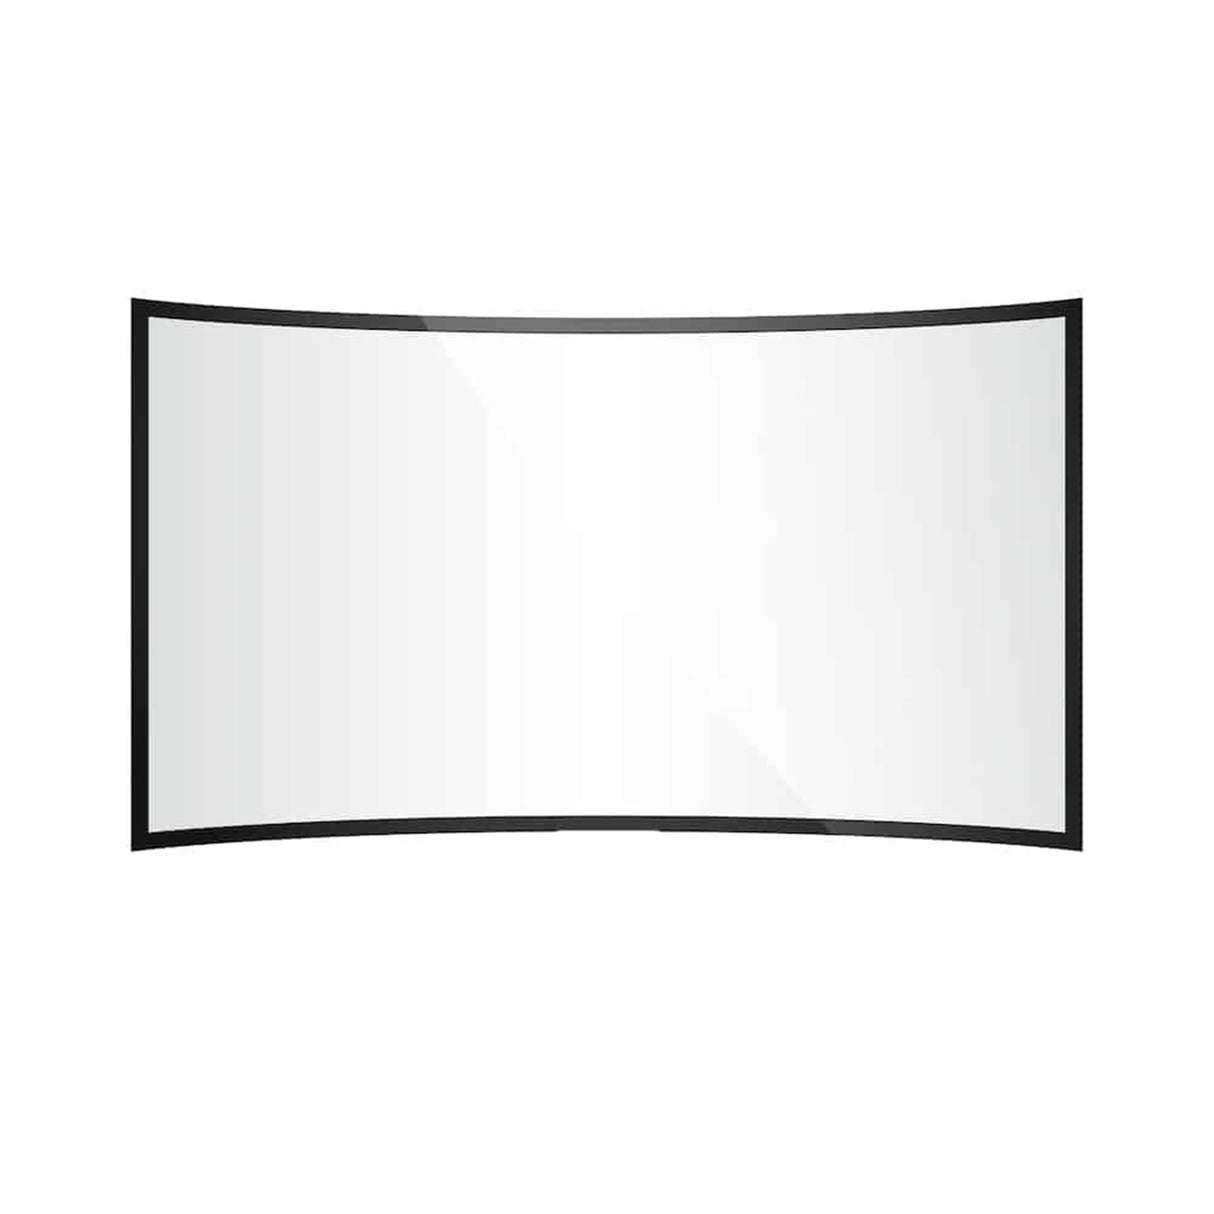 RNT Screen SableFrame Fixed Frame Curve Projection Screen 220'' (16:9) (Matte White)